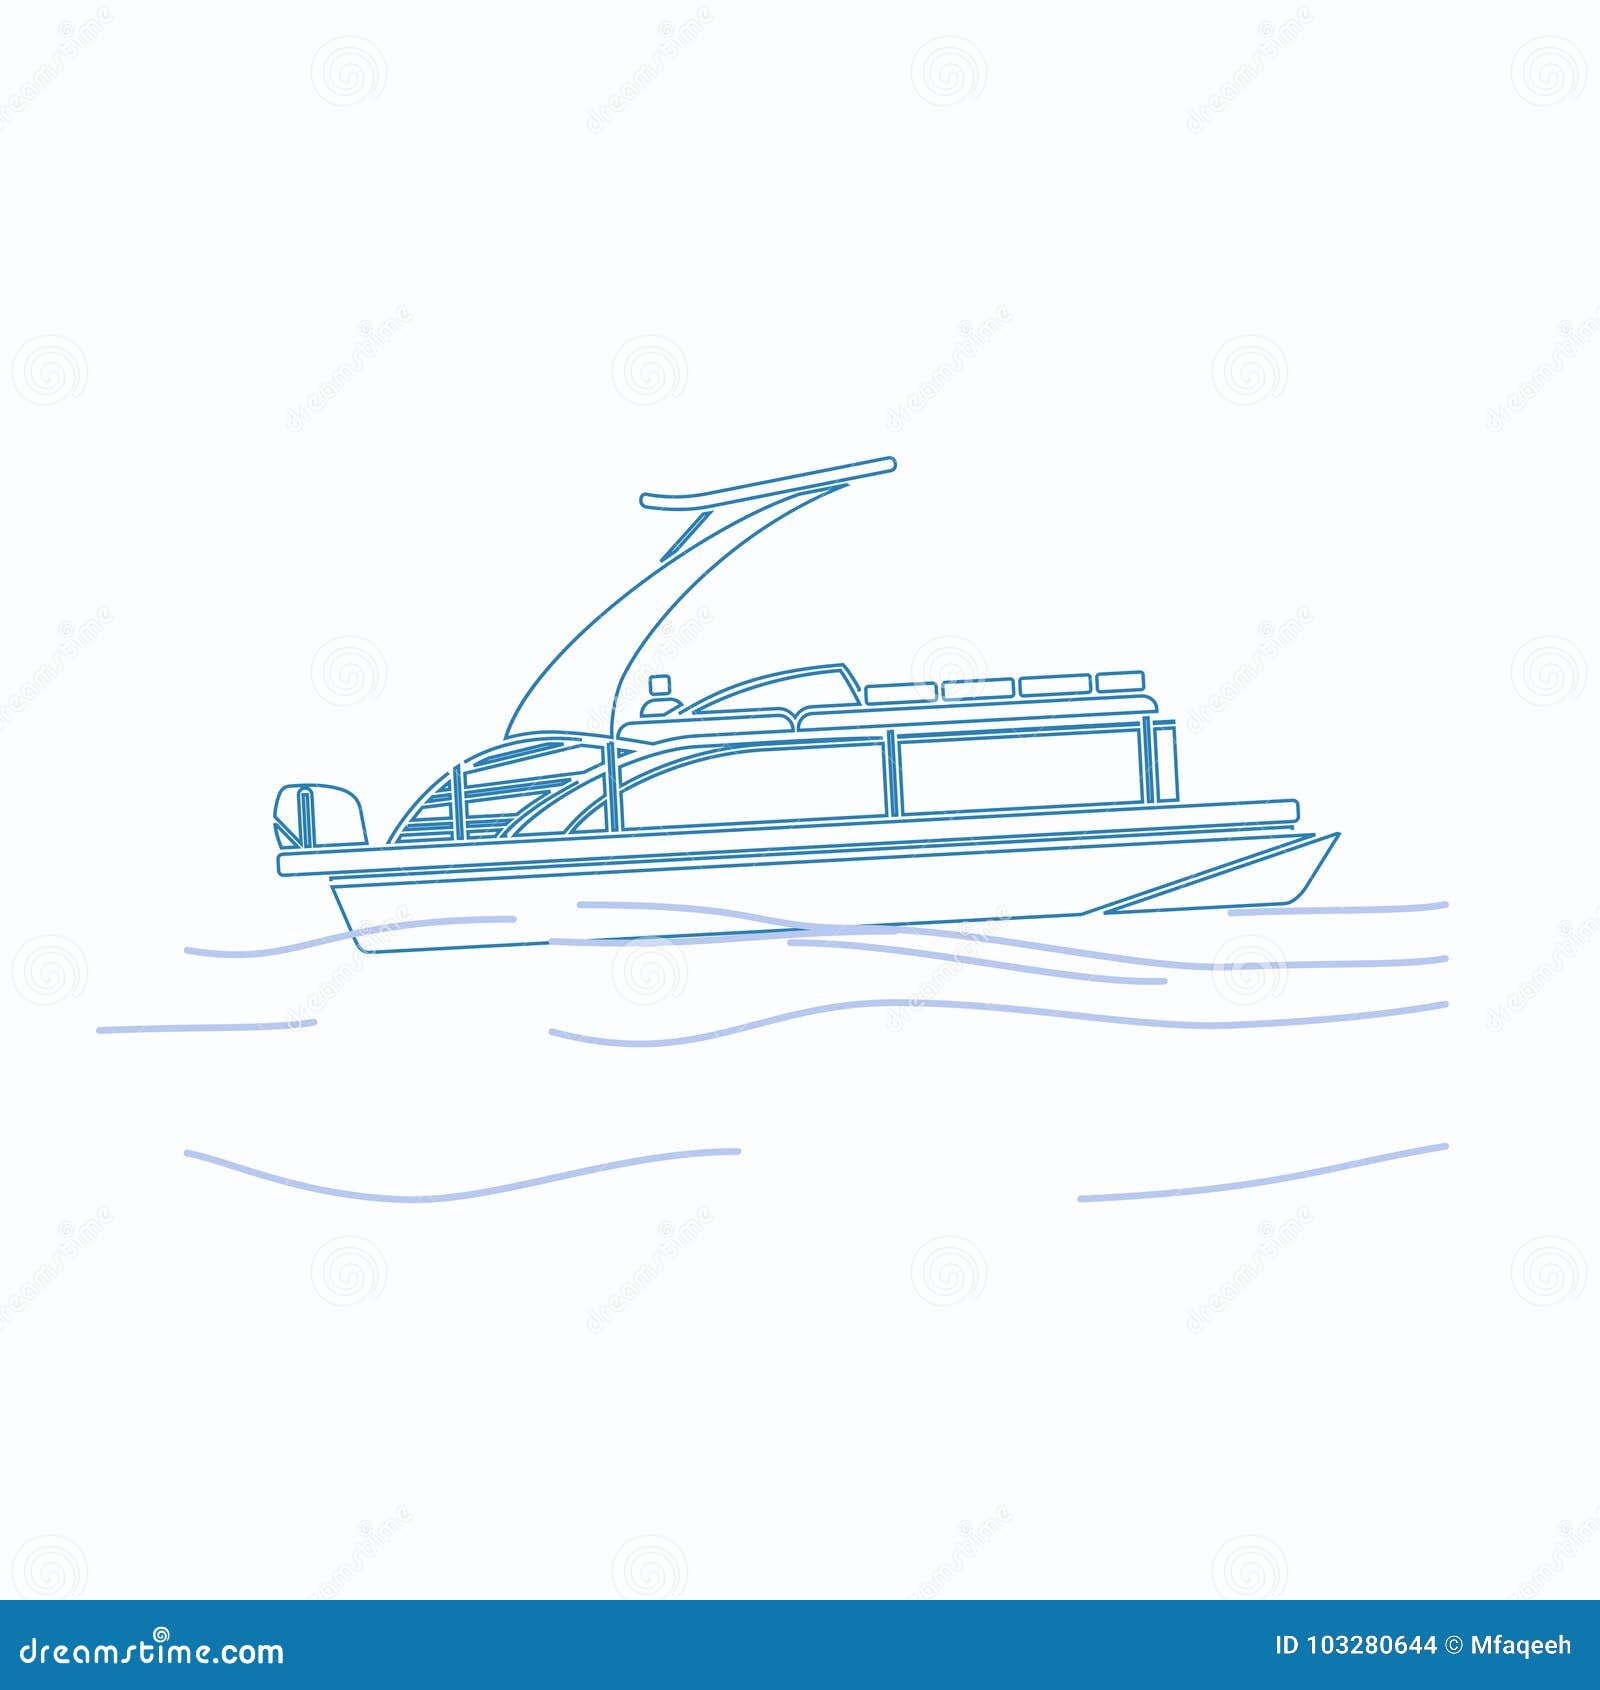 outline style sport arch pontoon boat  